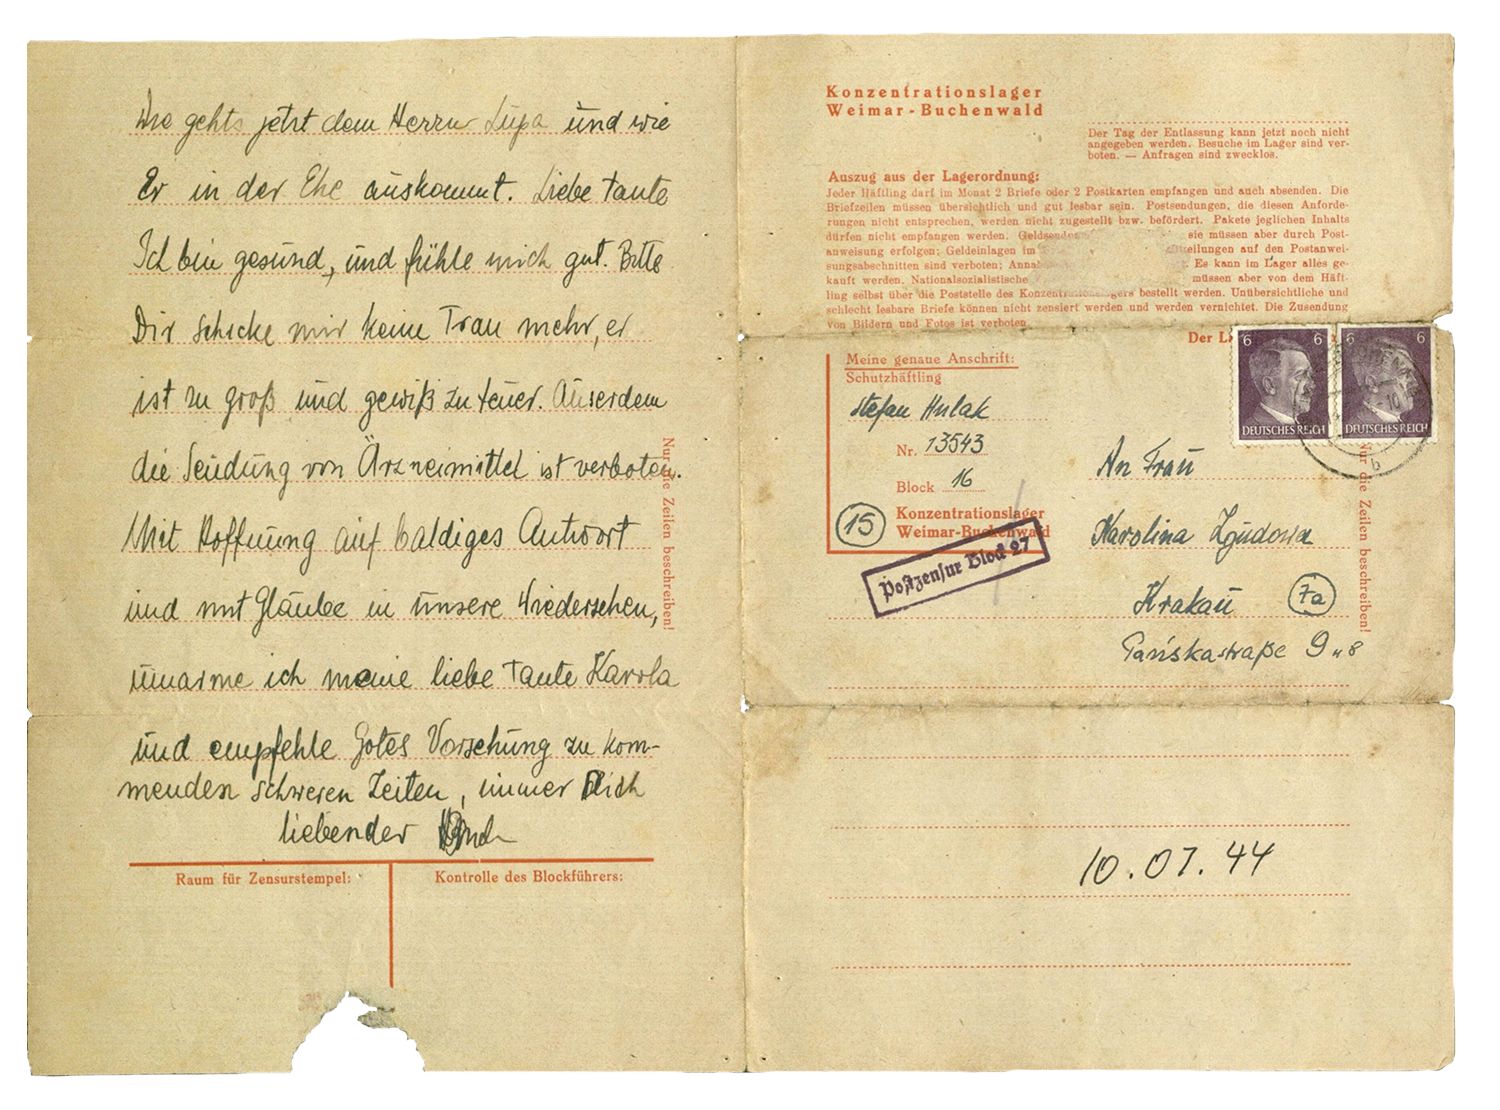 Henry’s letter from Buchenwald is dated July 10, 1944, and relates a personal message of thanks to family members for food and money that had been previously received.